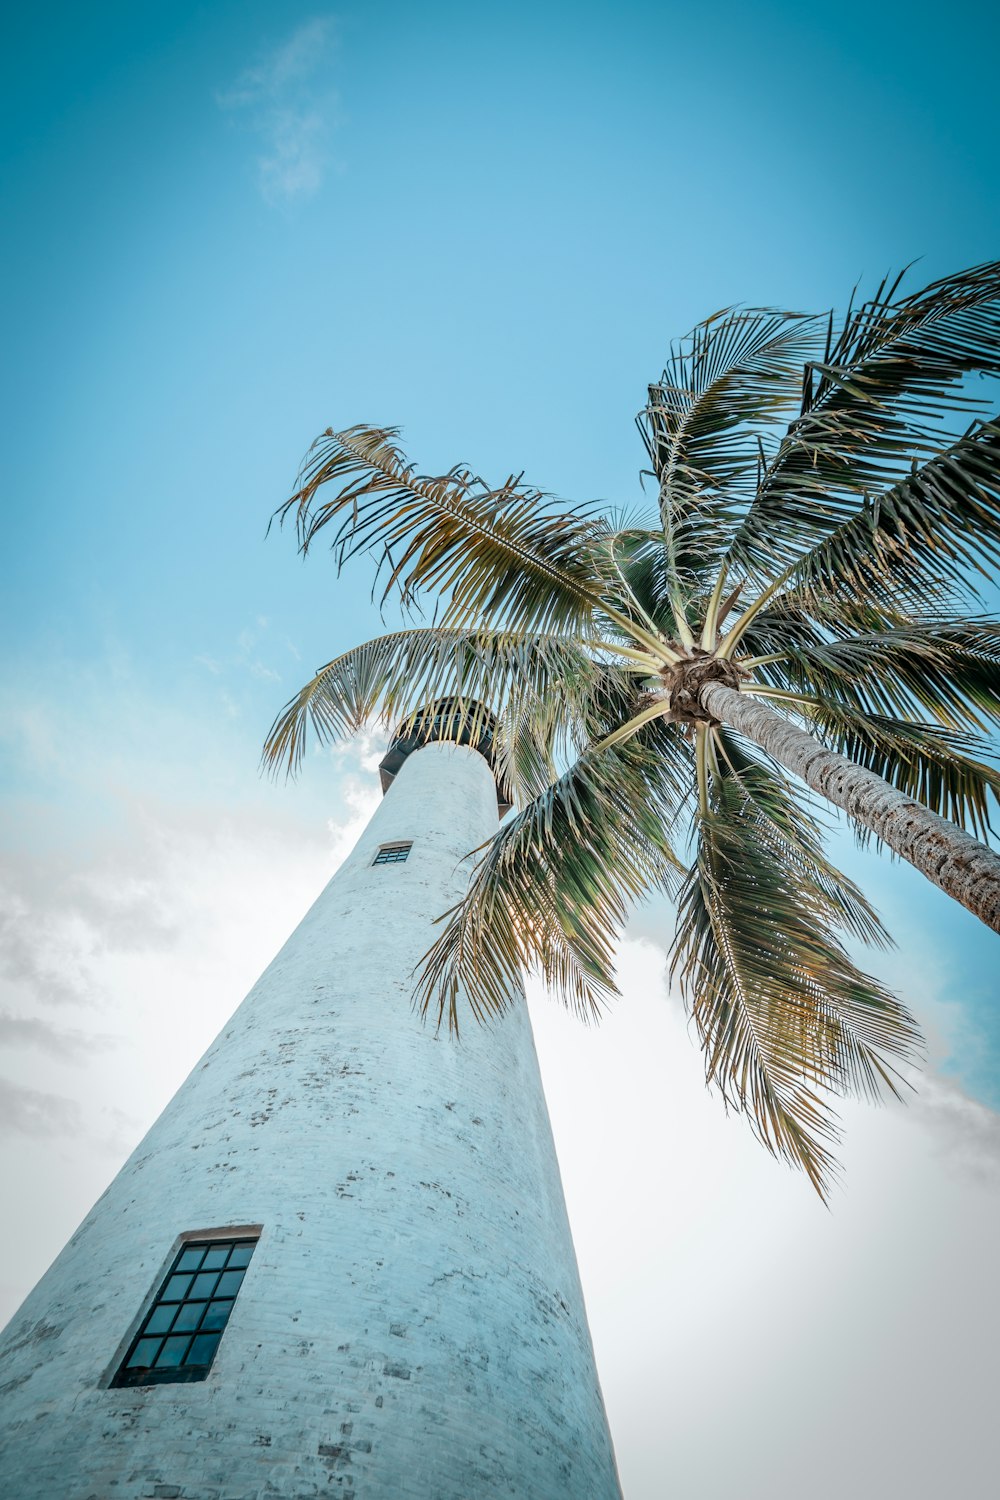 a tall white tower with a palm tree in front of it